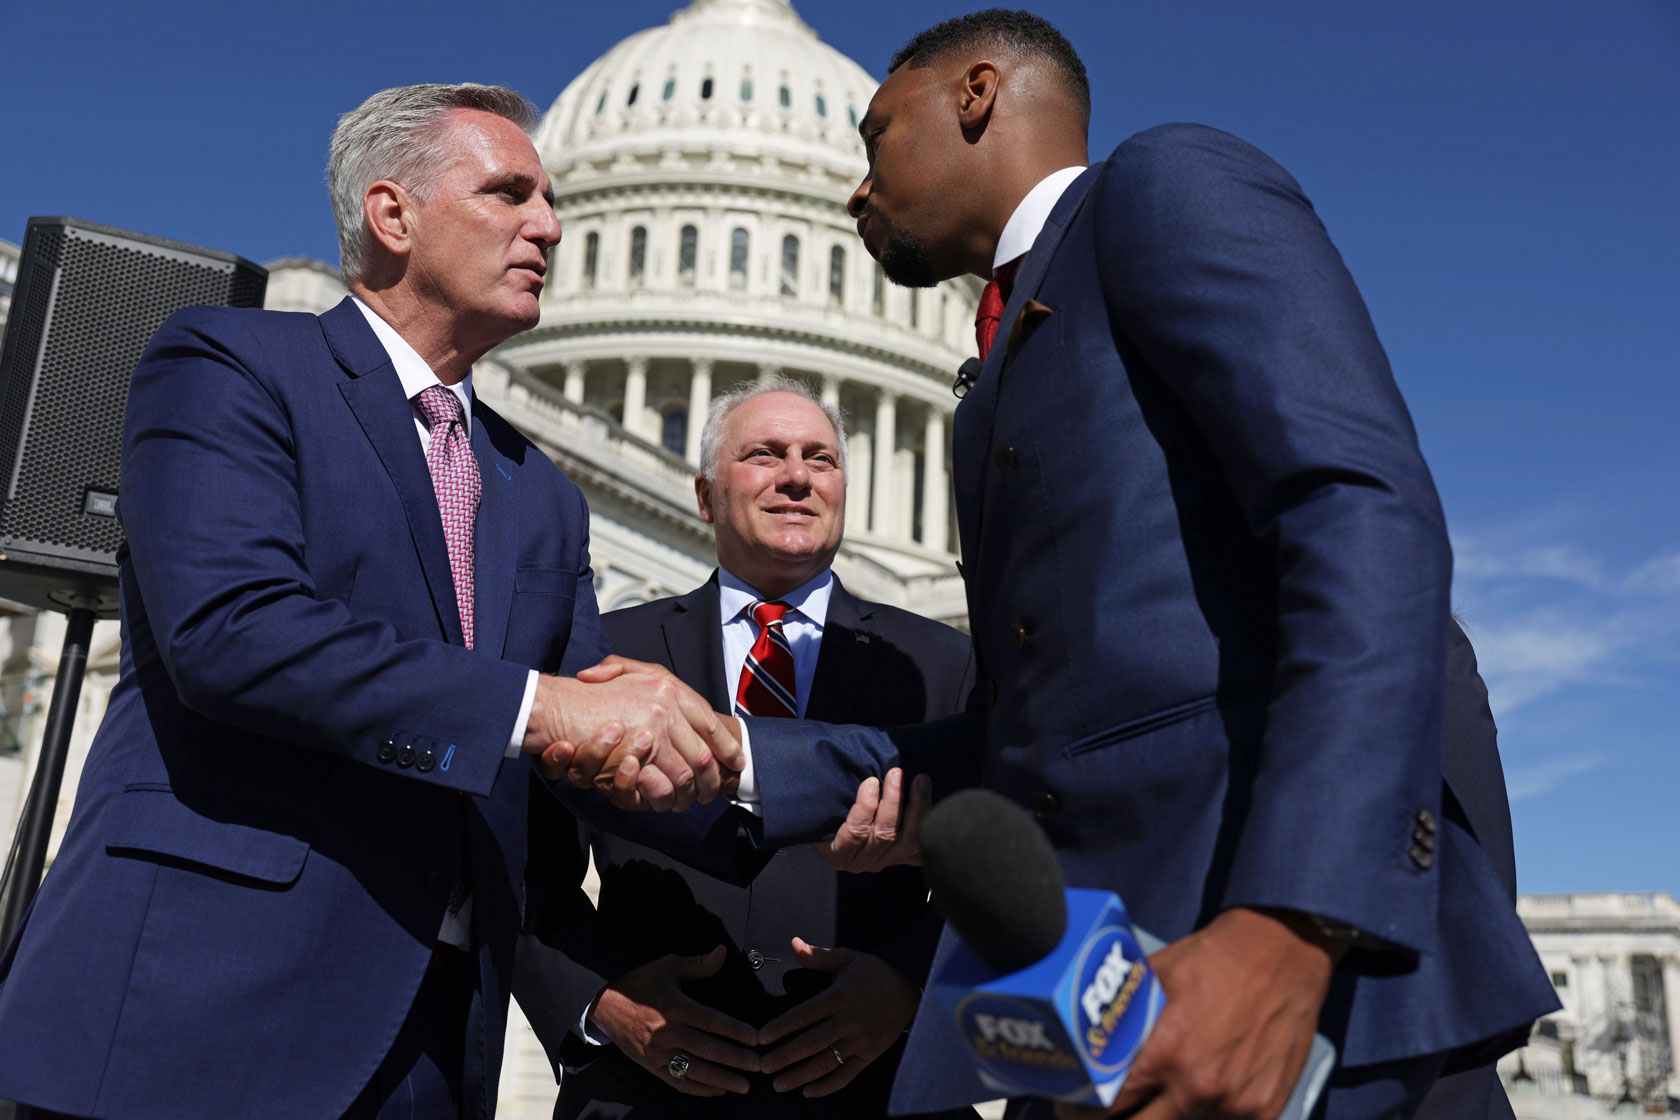 U.S. House Minority Leader Rep. Kevin McCarthy (R-CA) and House Minority Whip Rep. Steve Scalise (R-LA) are interviewed by a political analyst.